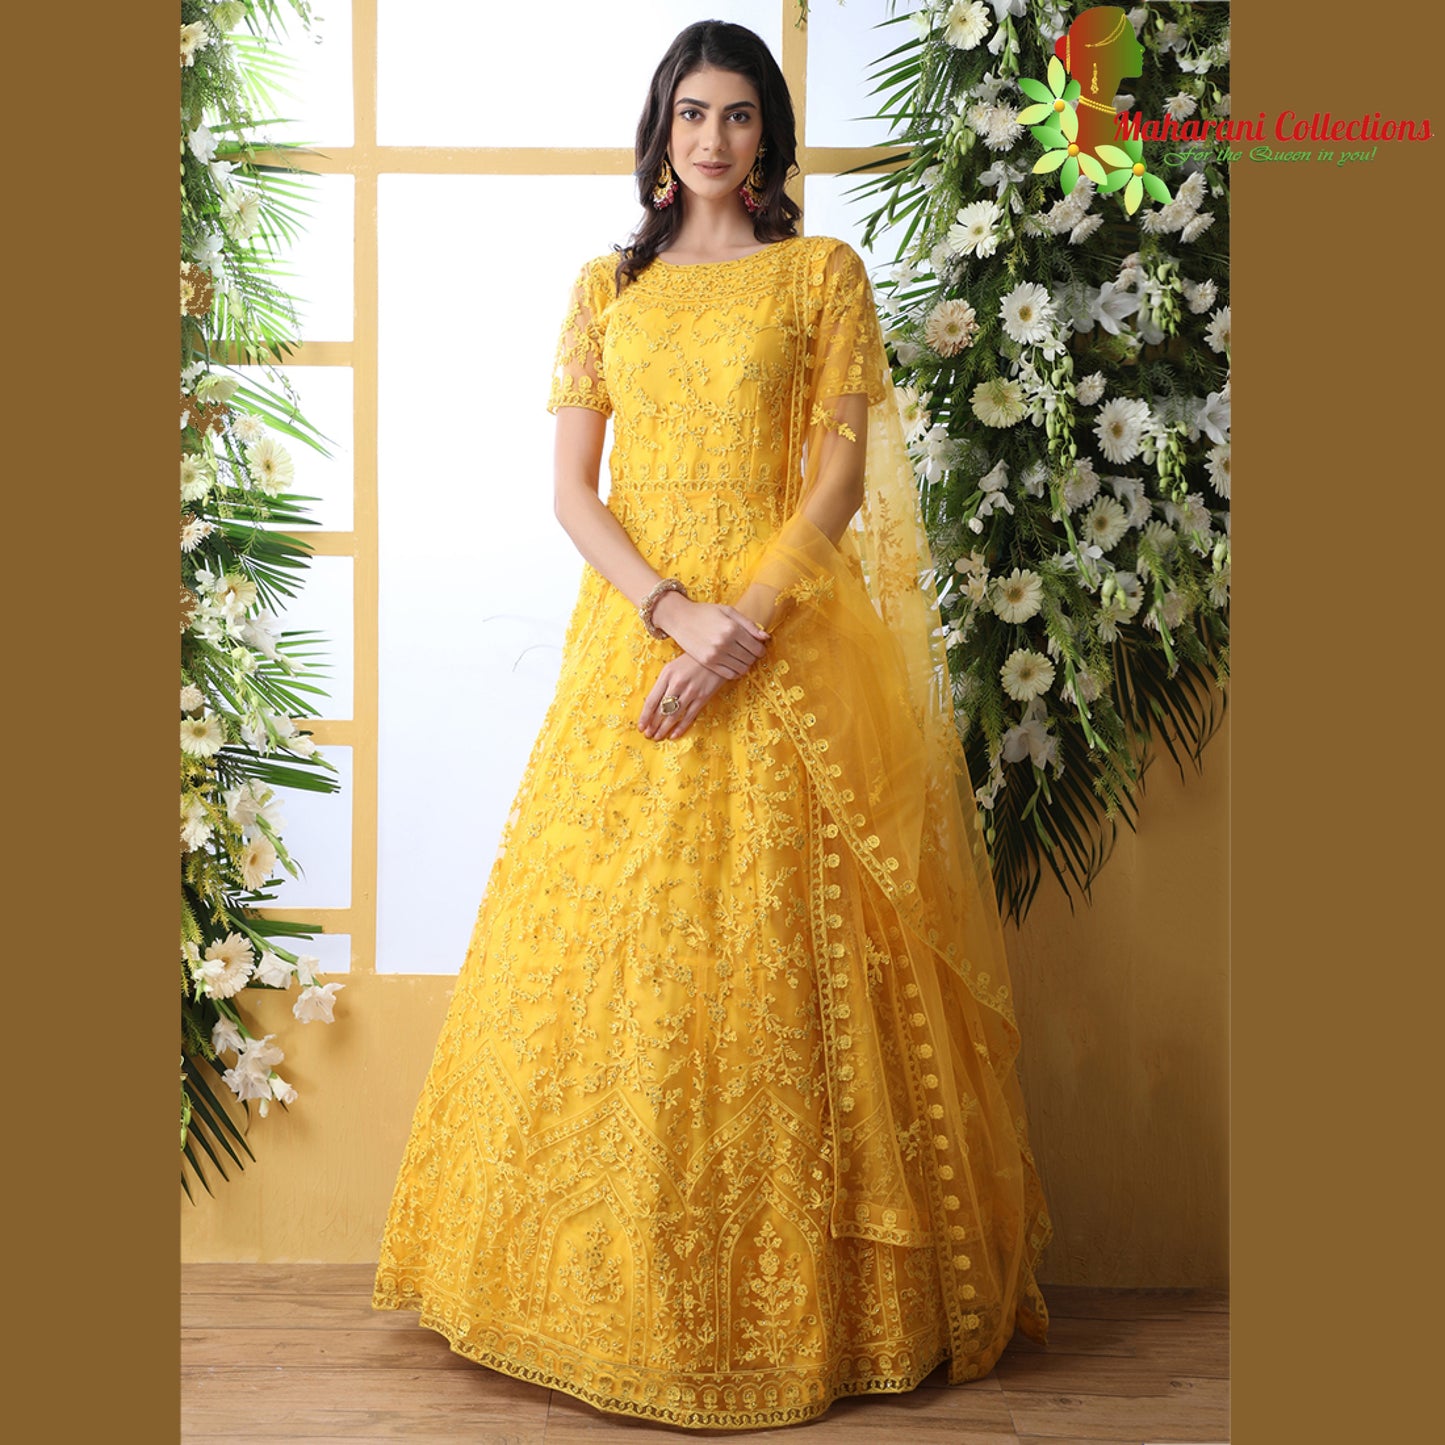 Designer Gala Gown (Anarkali Suit) - Yellow with Stone and Exquisite Thread Work